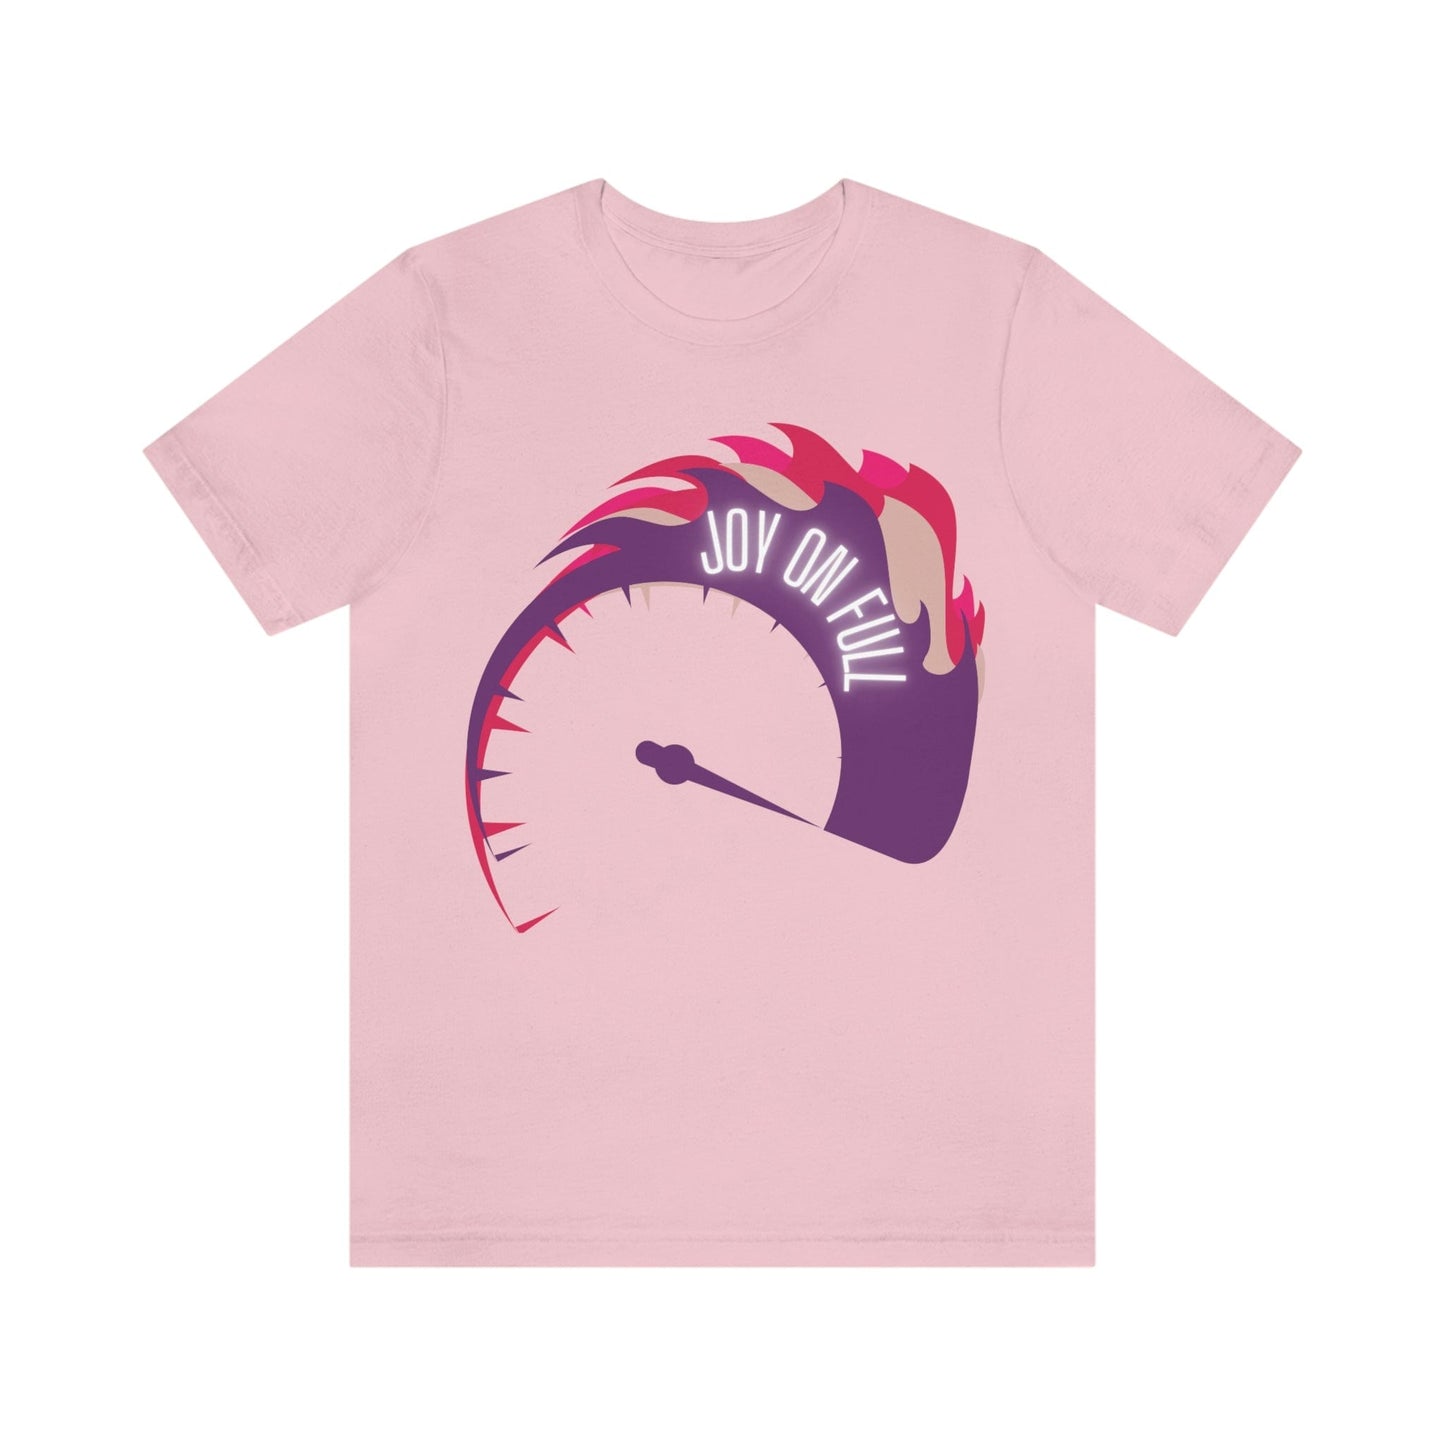 Joy On Full (Graphic Colorful Design With Speedometer) Unisex Jersey Short Sleeve Tee - Style: Bella+Canvas 3001